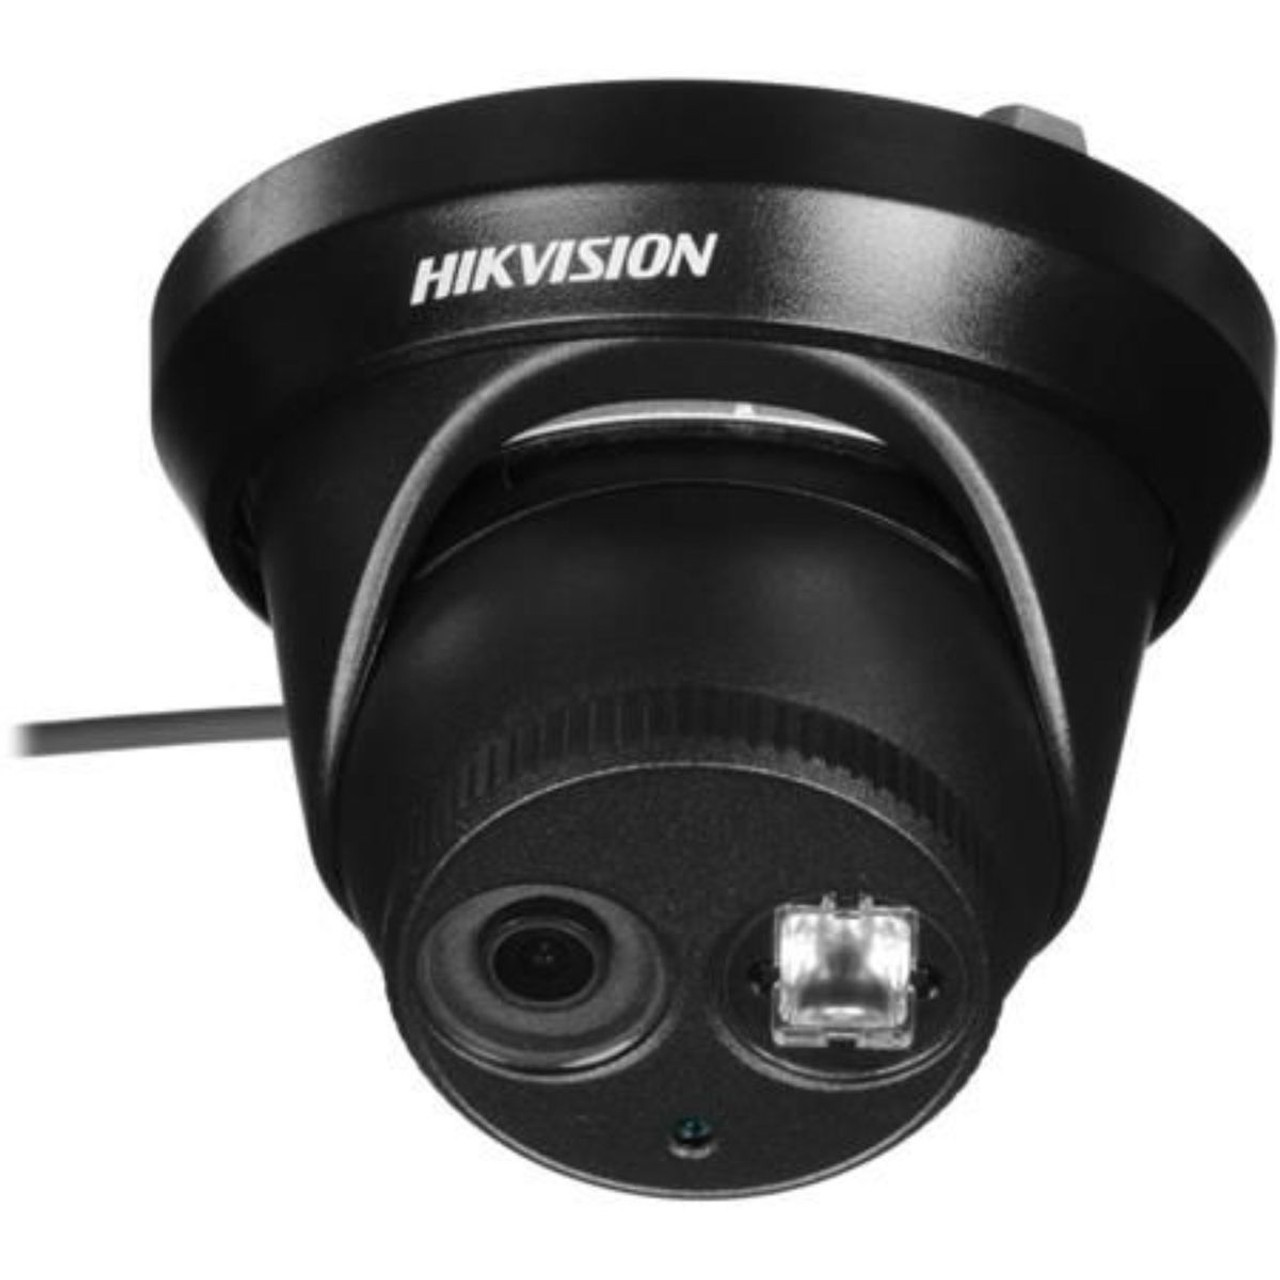 Hikvision 2MP HD Outdoor Security Cam (3D-DNR, WDR, EXIR 6mm) product image